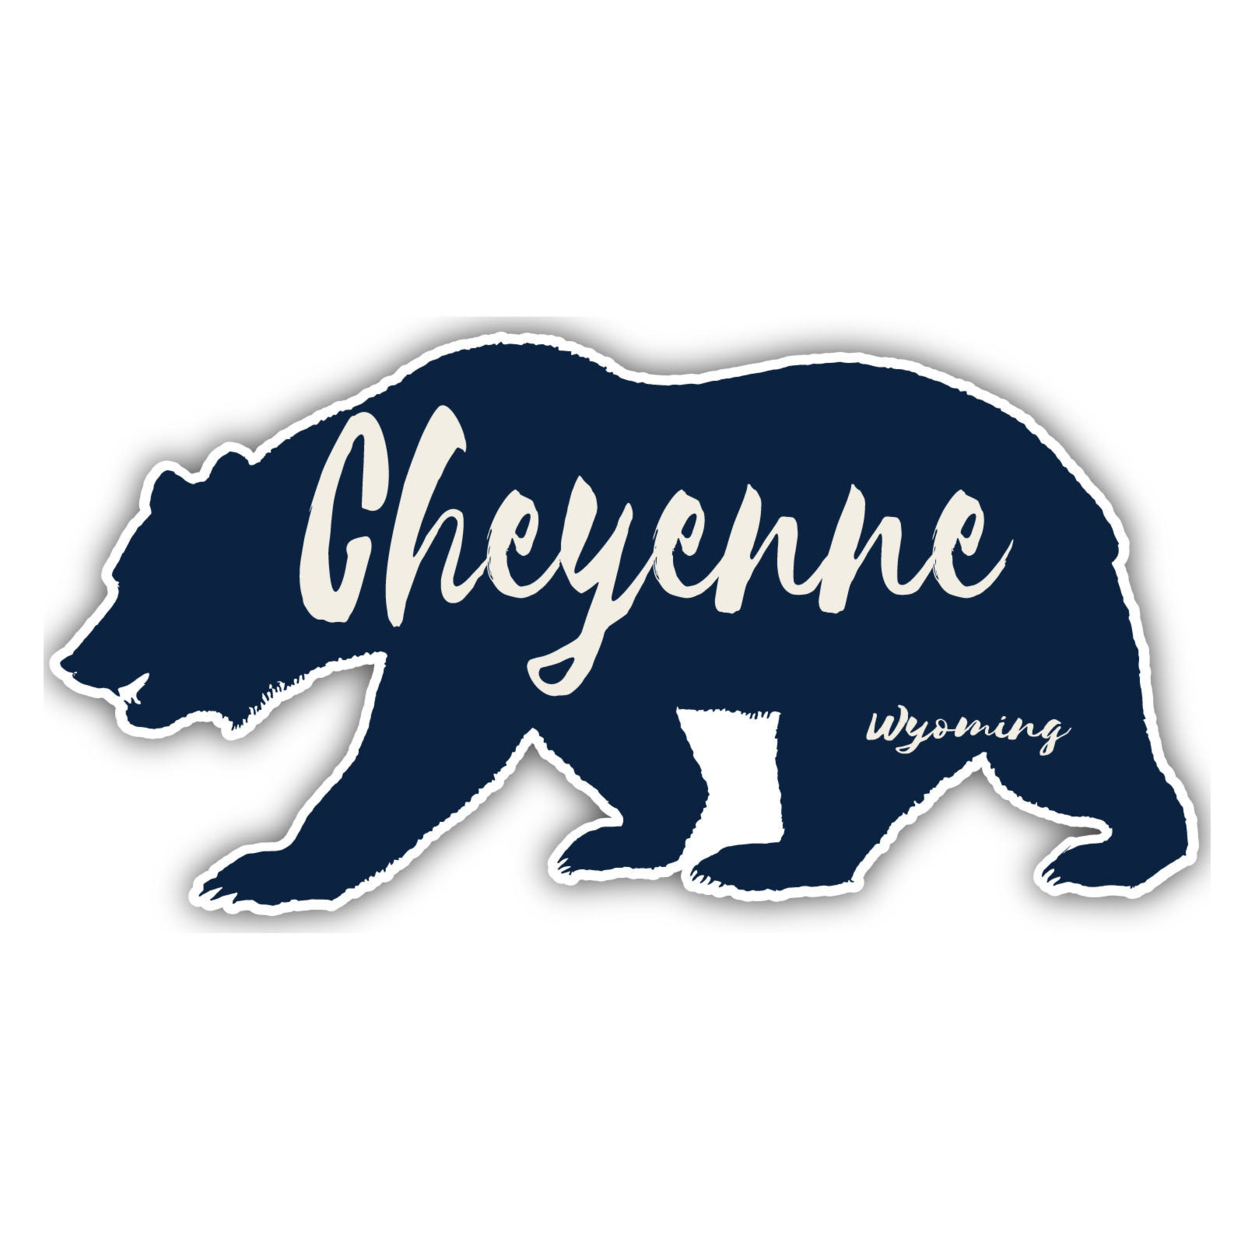 Cheyenne Wyoming Souvenir Decorative Stickers (Choose Theme And Size) - 4-Pack, 2-Inch, Camp Life